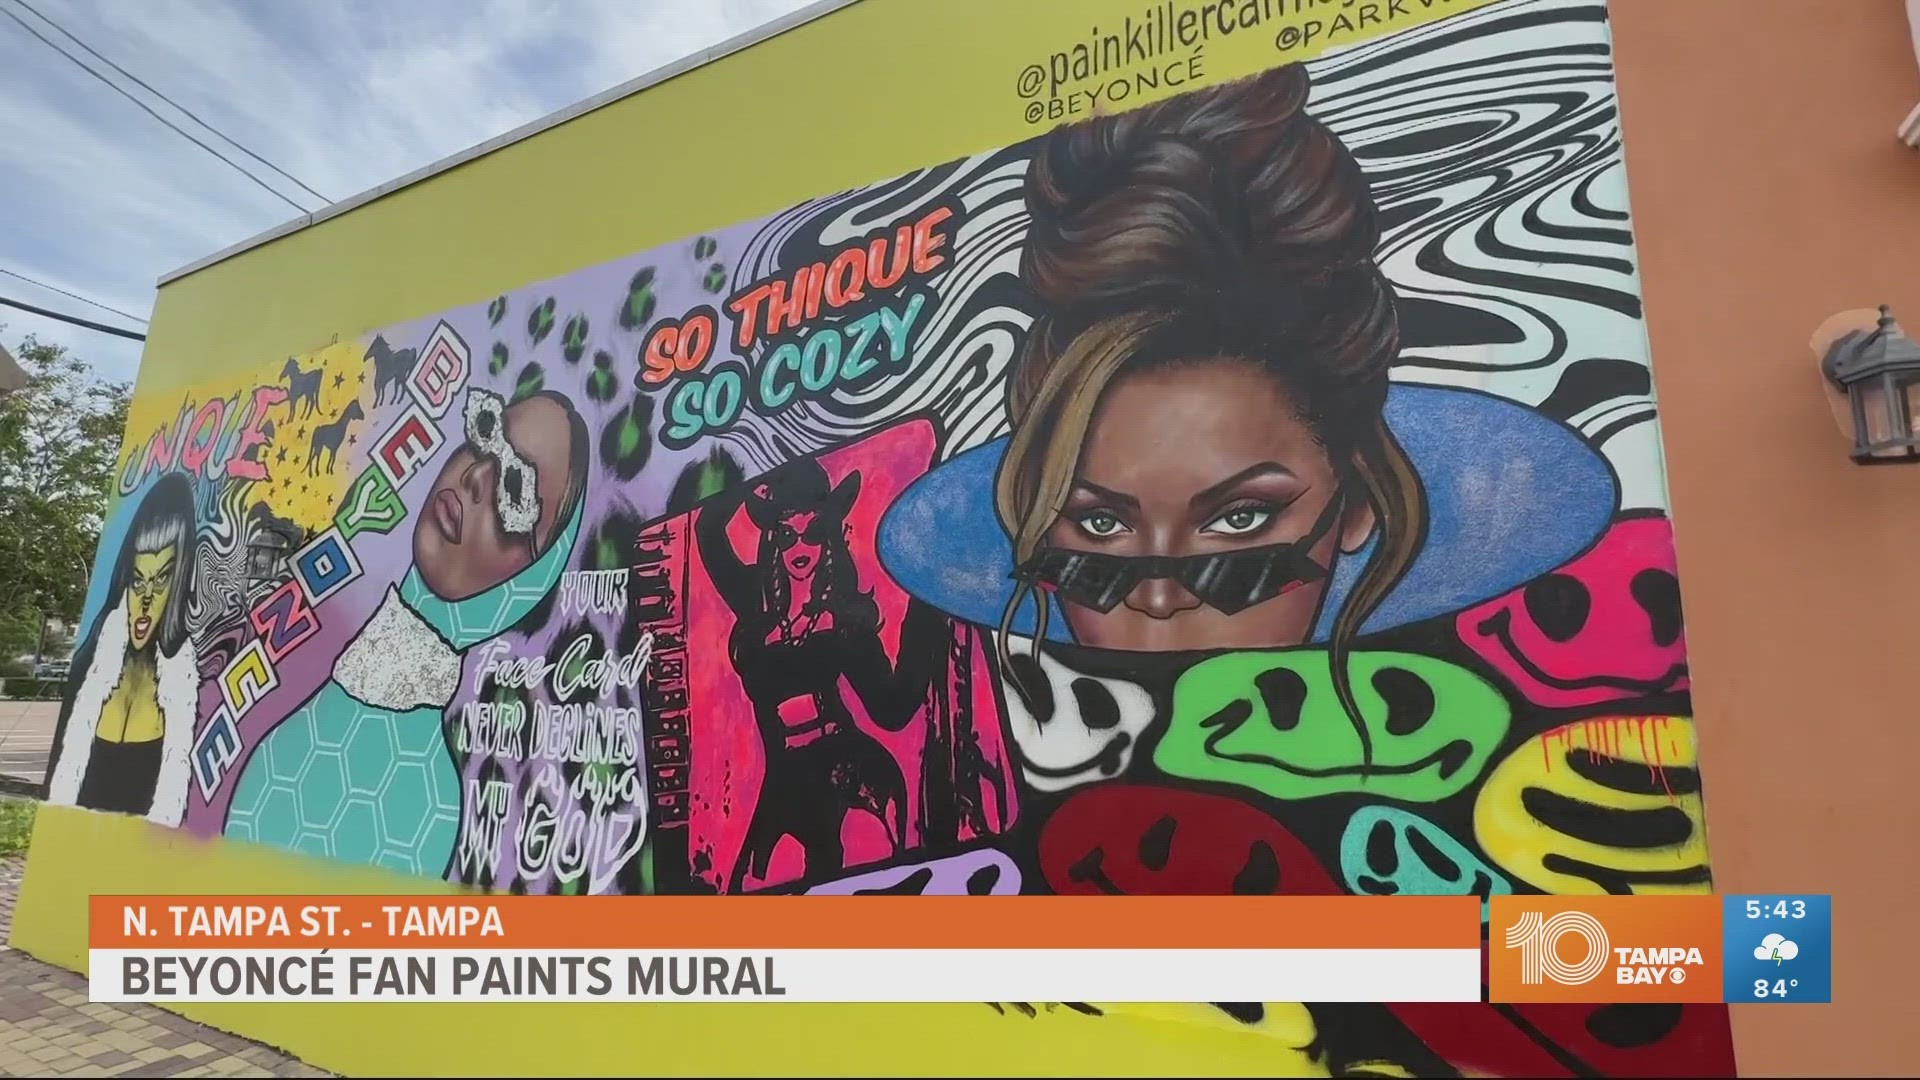 A local super-fan wanted to make sure the singer felt a warm welcome to the city by painting a mural of her.